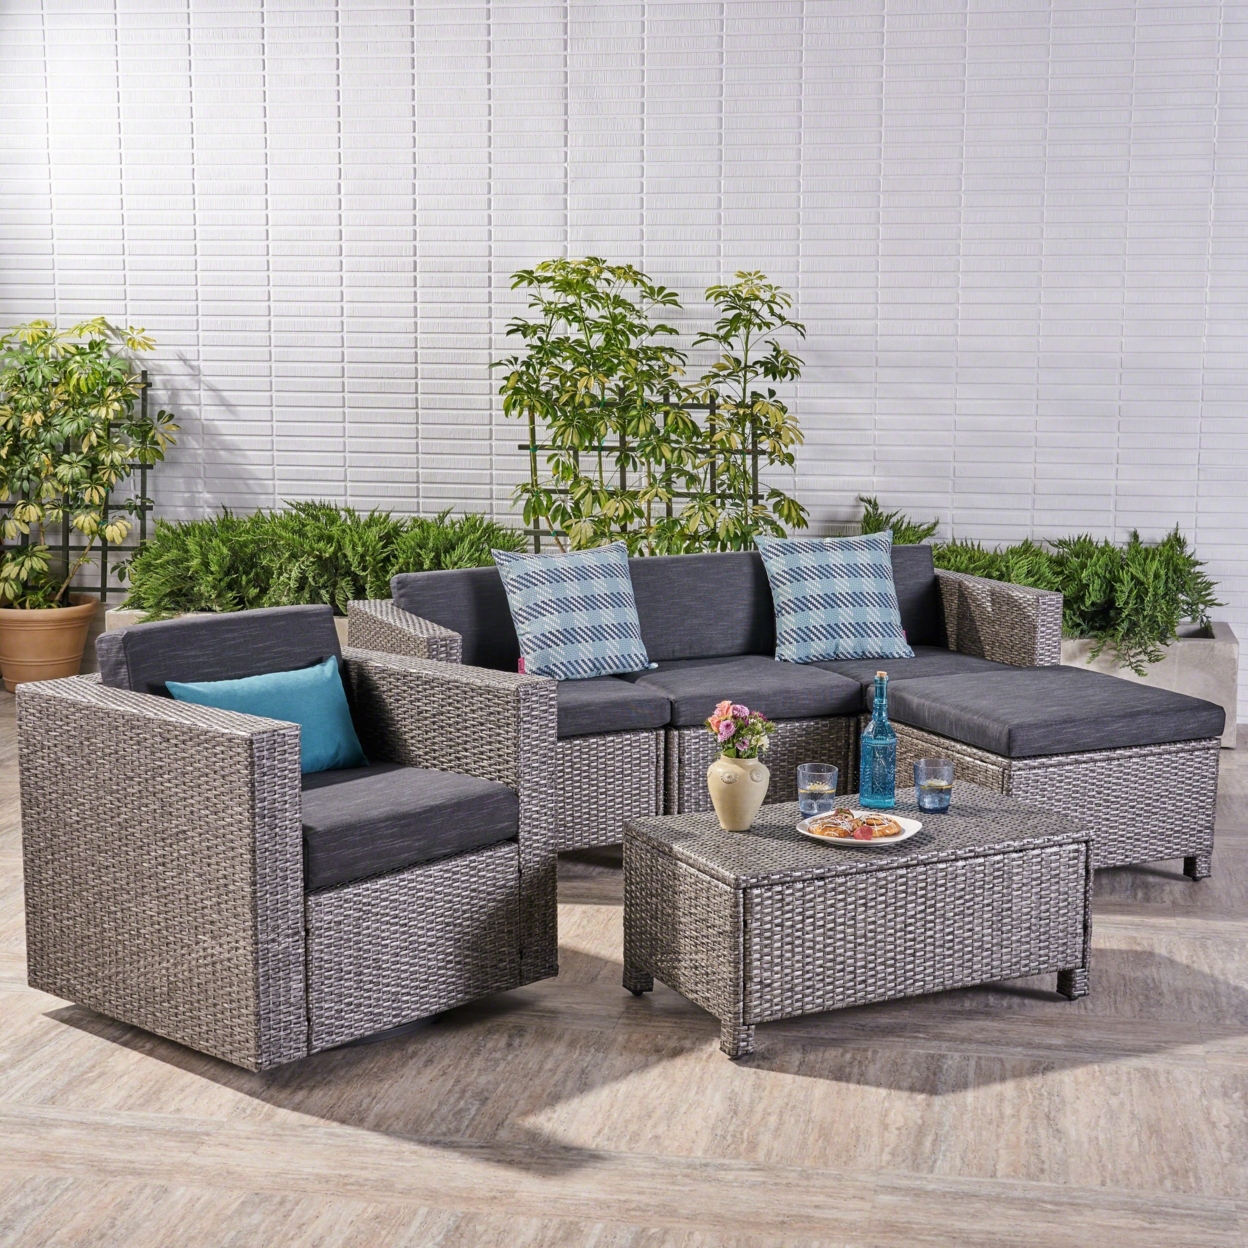 Buzz Outdoor 4 Seater Wicker L-Shaped Sectional Sofa Set With Cushions, Mixed Black With Dark Grey Cushions